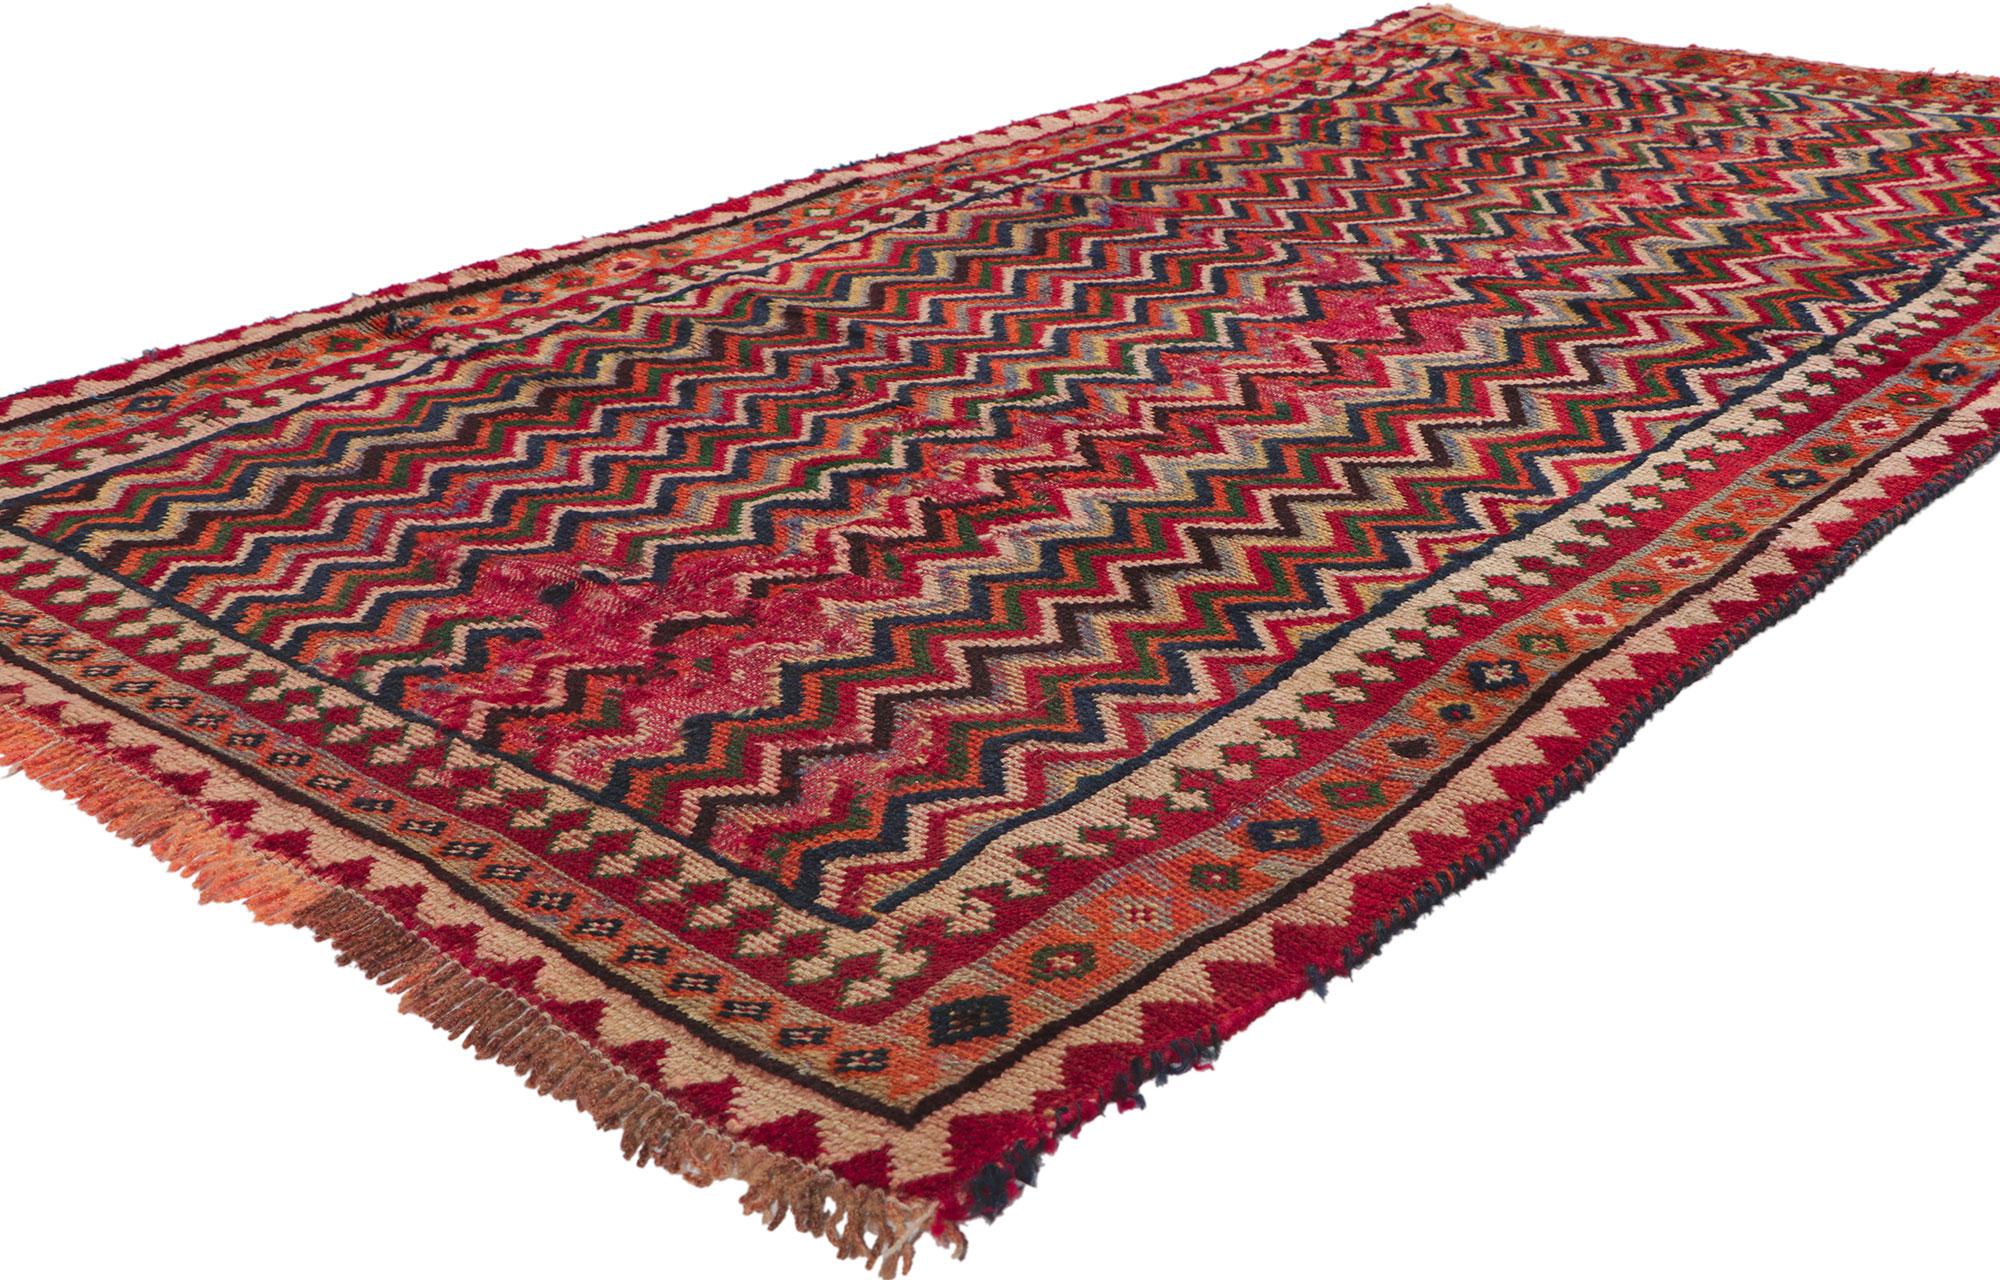 61050 antique Persian Ghashghaei rug, 03'11 x 07'06. Full of tiny details and a bold expressive design combined with tribal style, this hand-knotted wool antique Persian Ghashghaei runner is a captivating vision of woven beauty. The lovingly